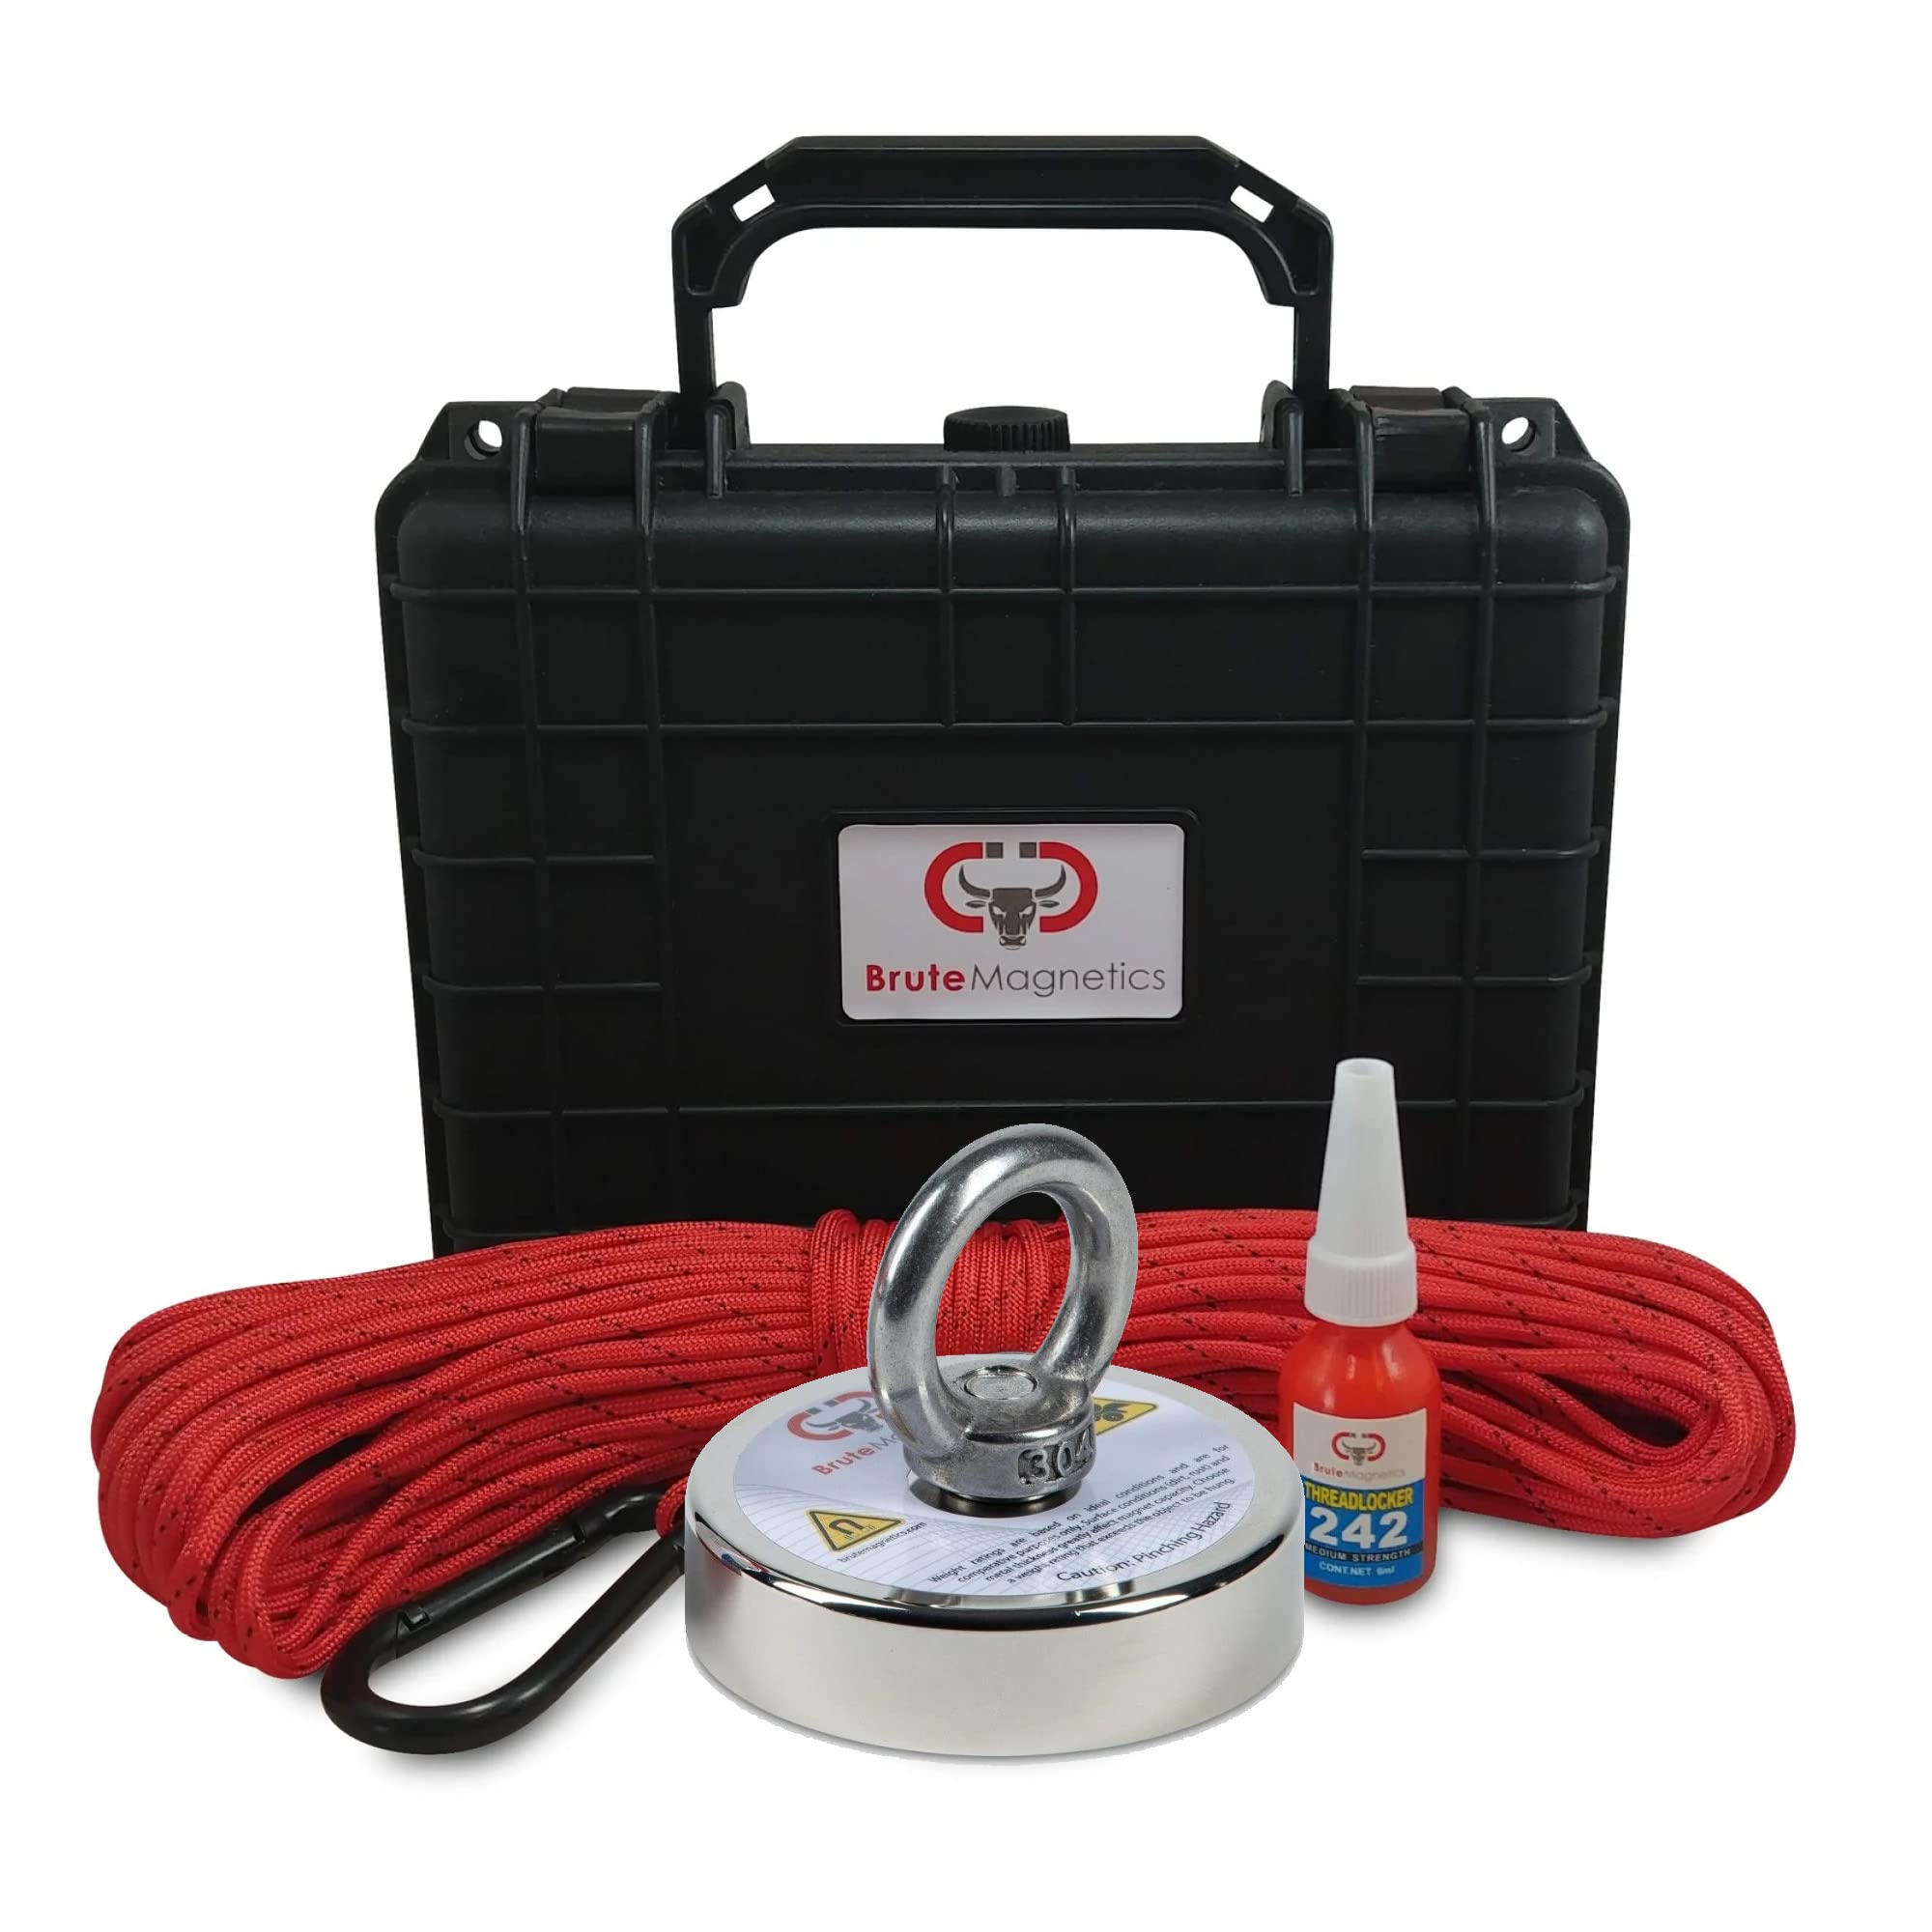 BRUTE MAGNETICS | 1200 LB High Strength Pull Force Magnet Fishing Kit |  Complete Kit with Brute Box Carry Case, Rare Earth Neodymium Single Sided